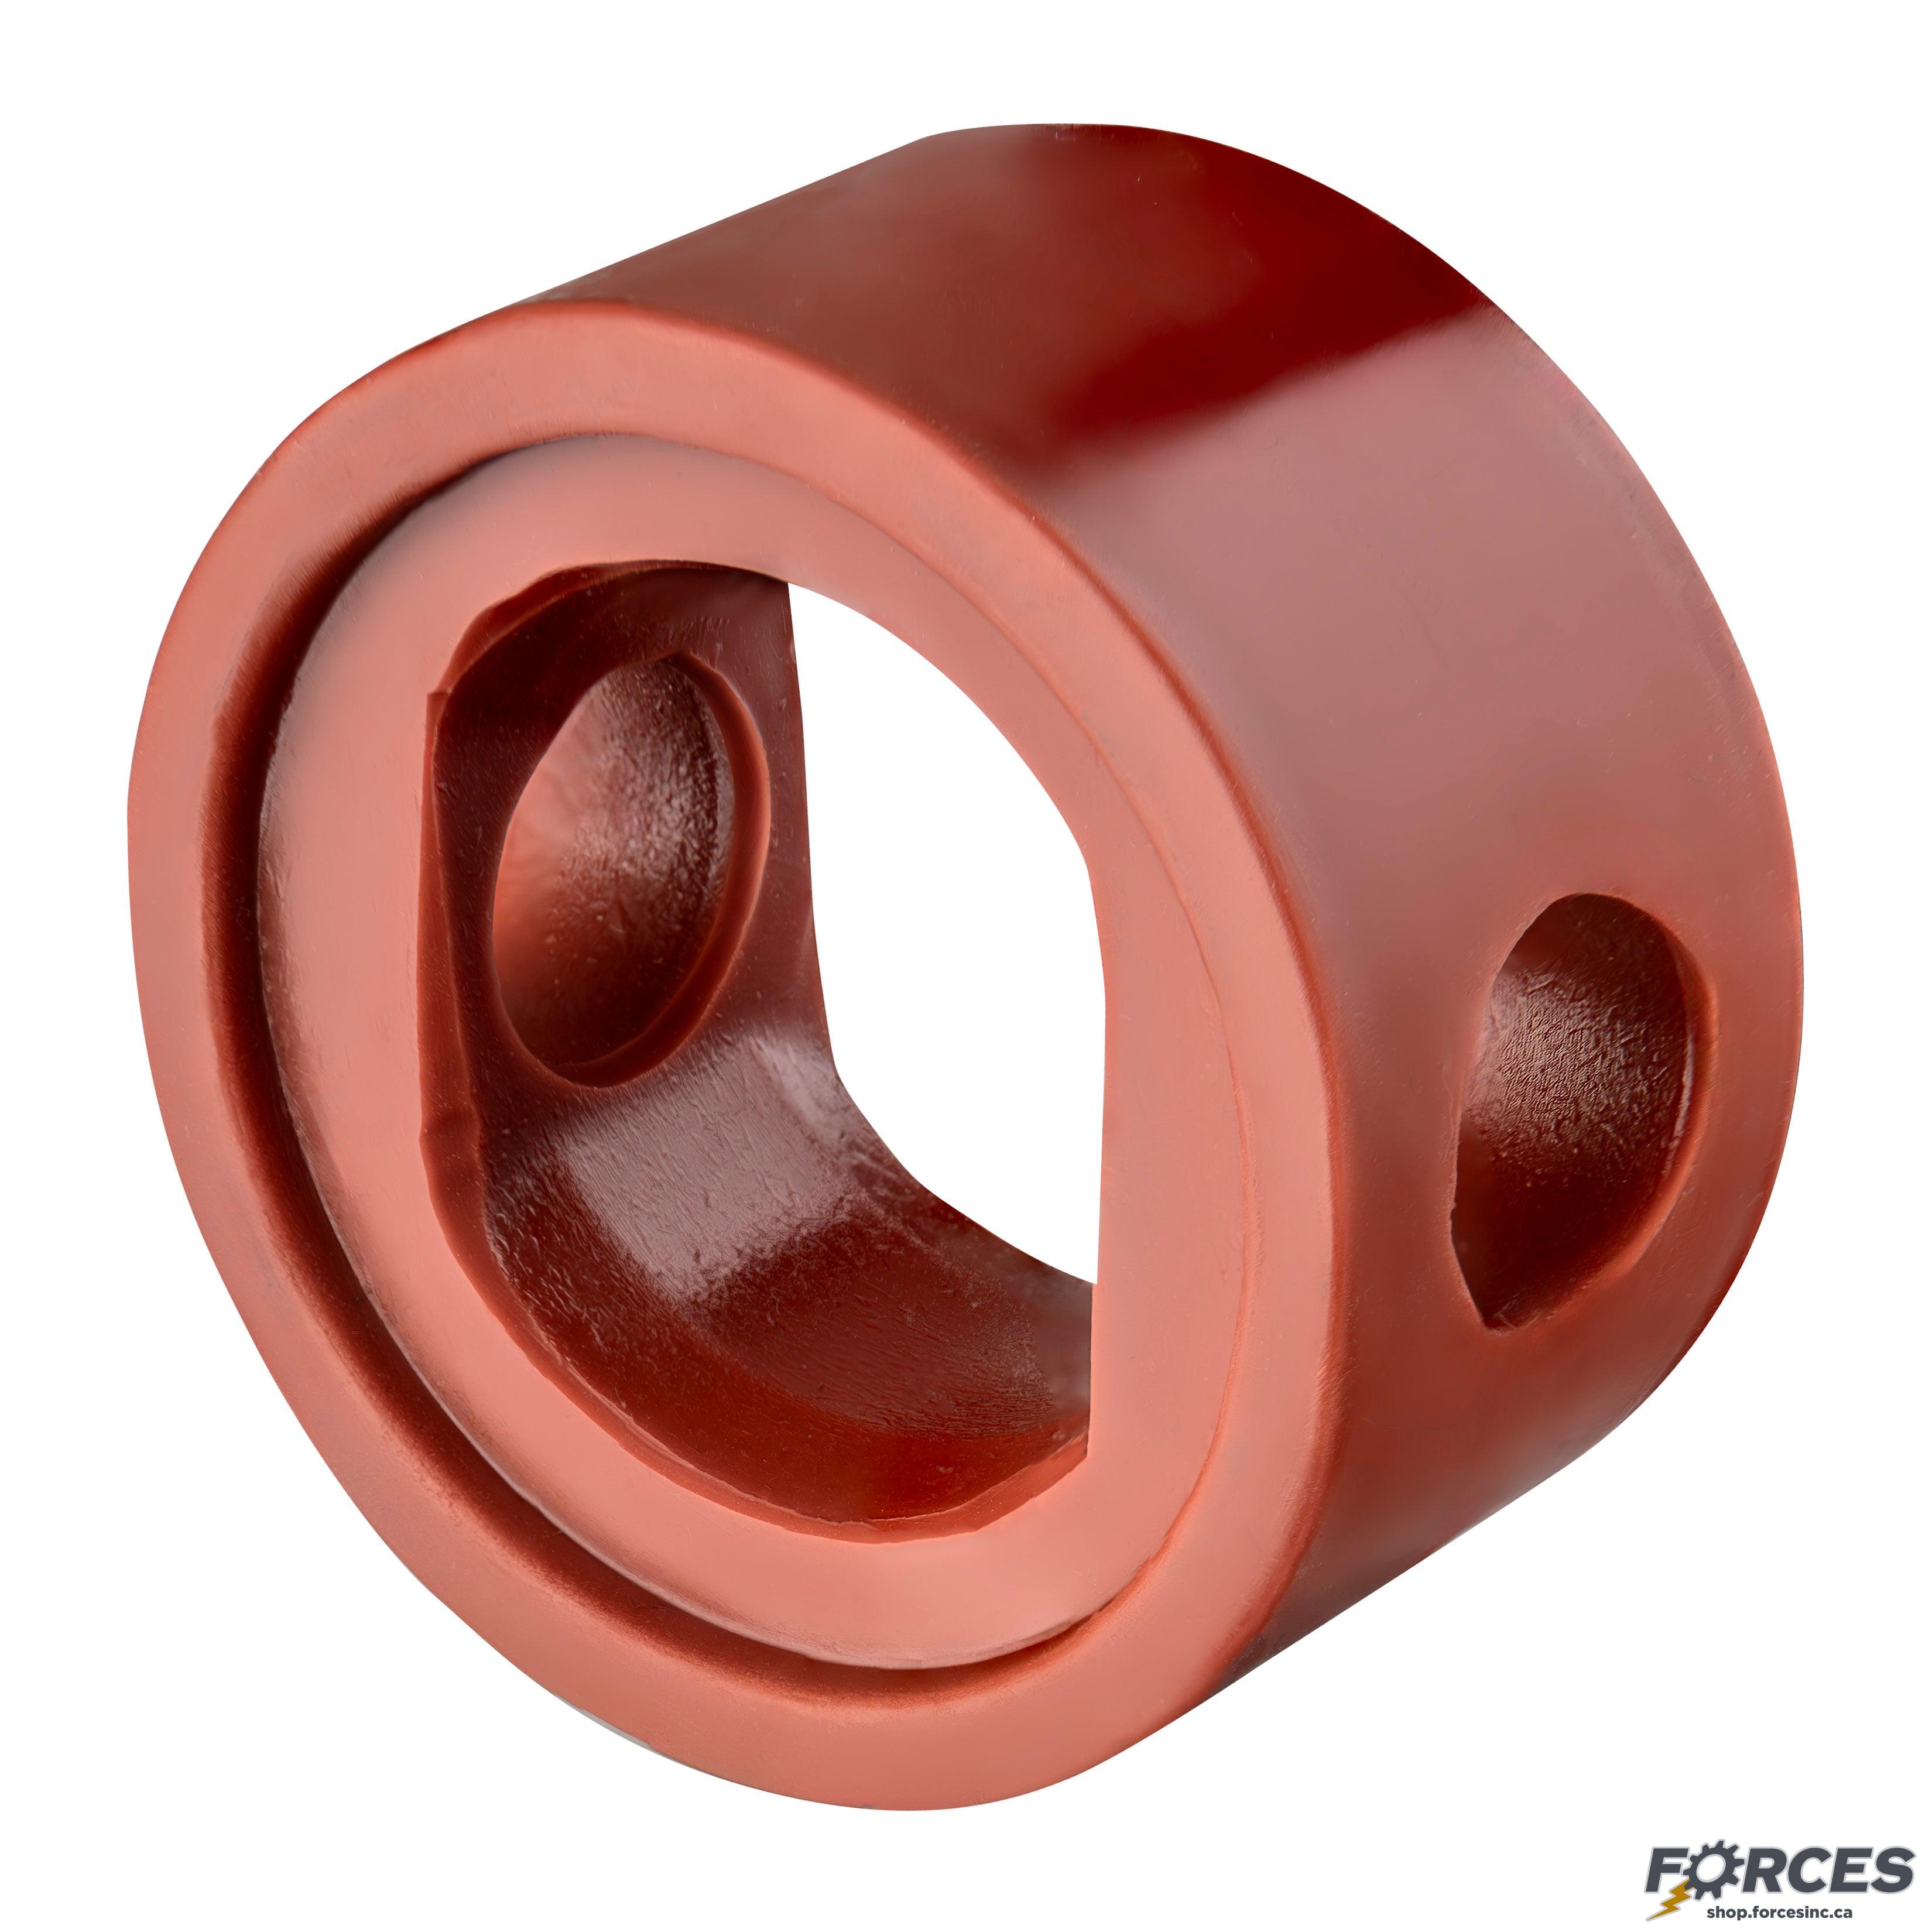 1" Sanitary Butterfly Valve Seat - Red Silicone - Forces Inc